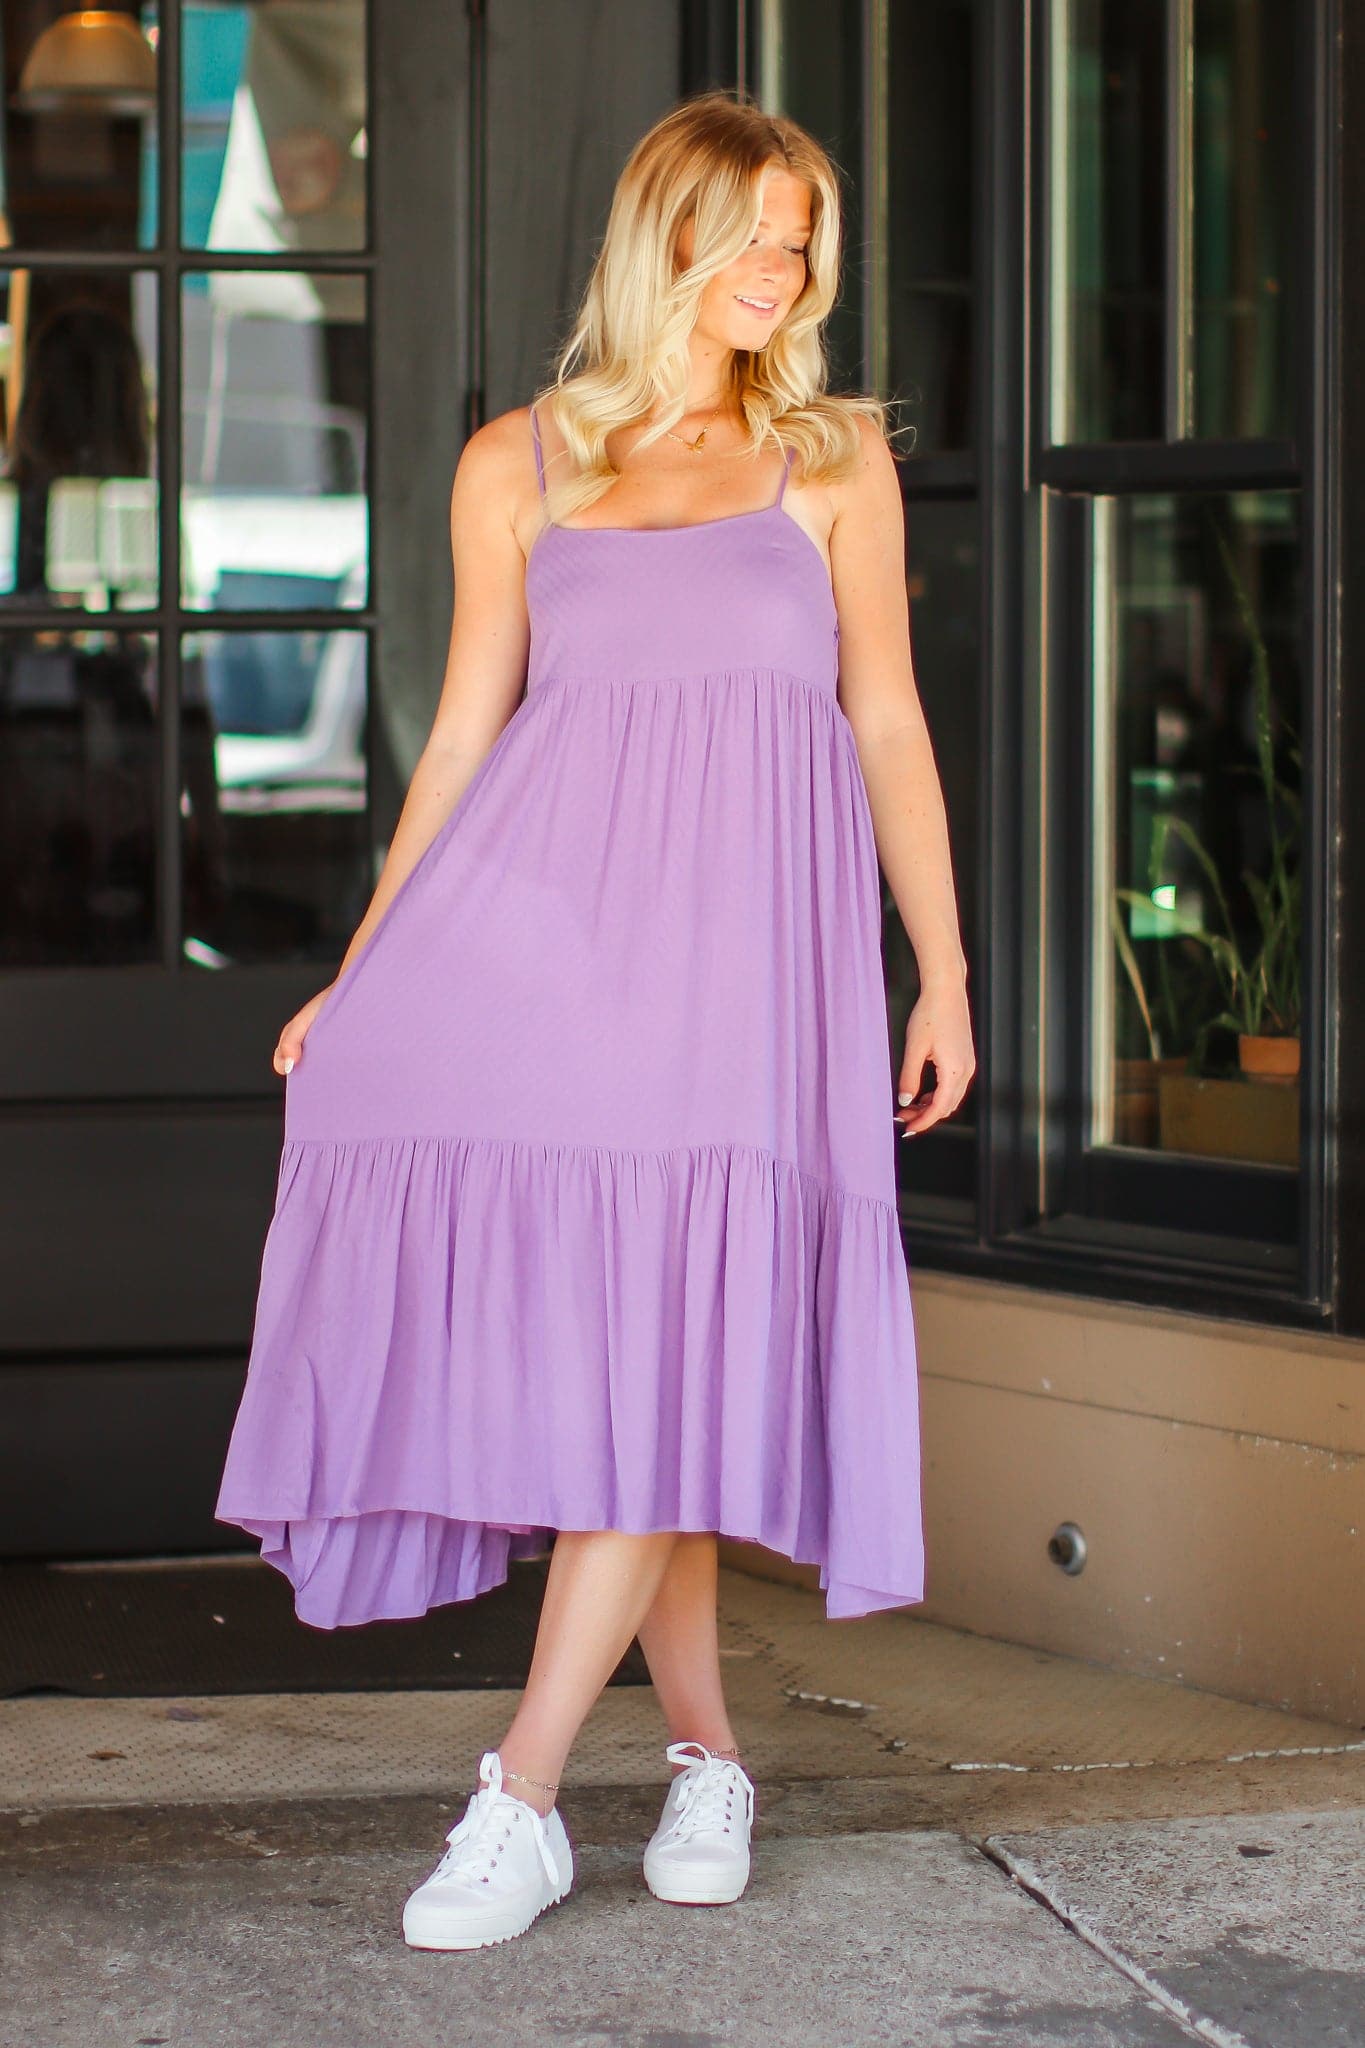  Chic Approach Flowy Tiered Dress - FINAL SALE - Madison and Mallory